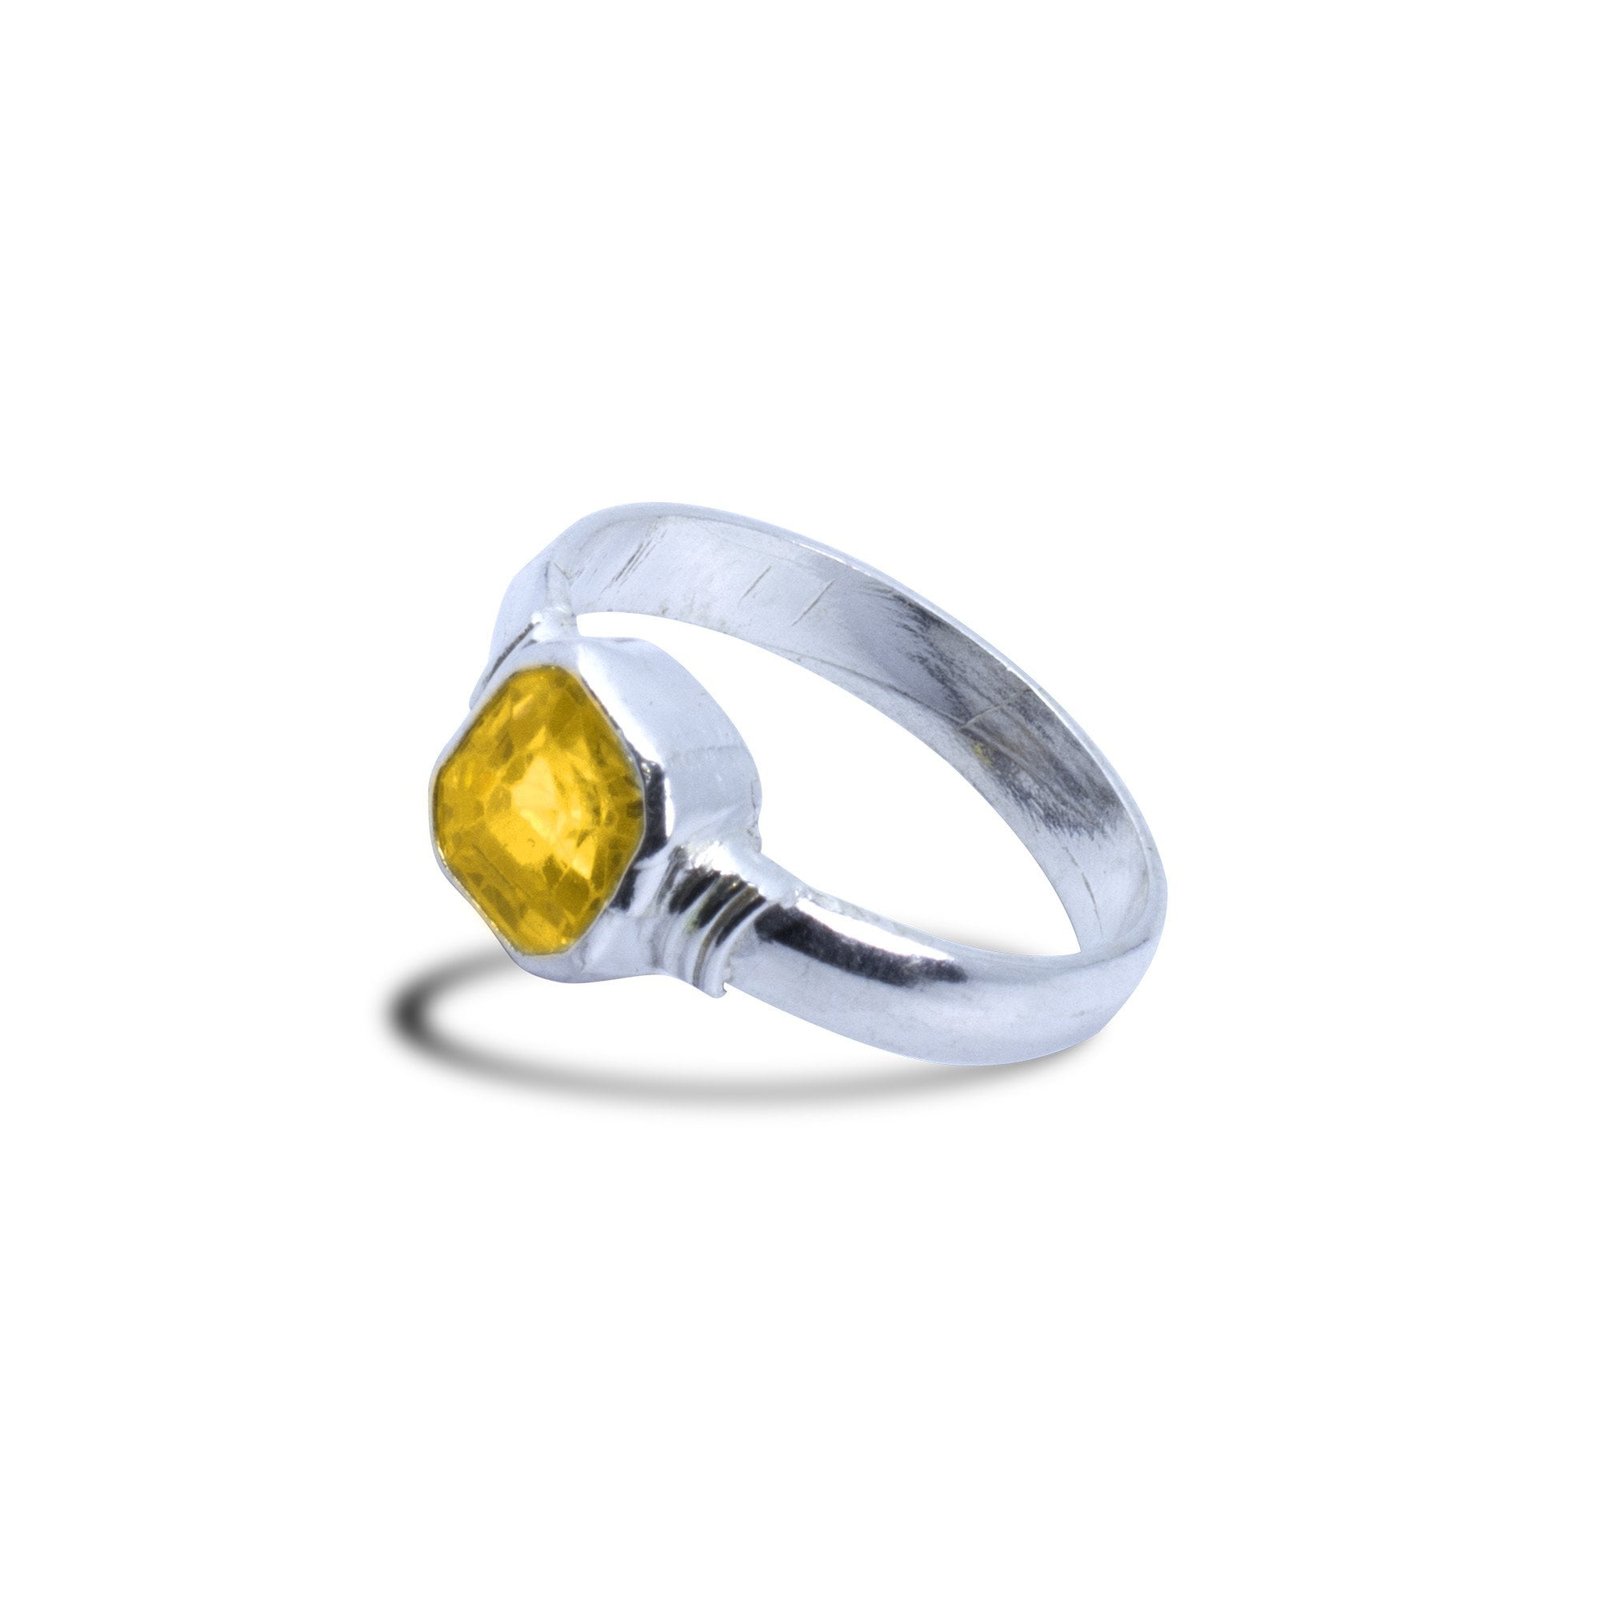 RSPR Certified 7.25 Ratti 6.60 Carat Natural Yellow Sapphire Pukhraj  Gemstone Ring for Women's and Men's Brass Sapphire Ring Price in India -  Buy RSPR Certified 7.25 Ratti 6.60 Carat Natural Yellow